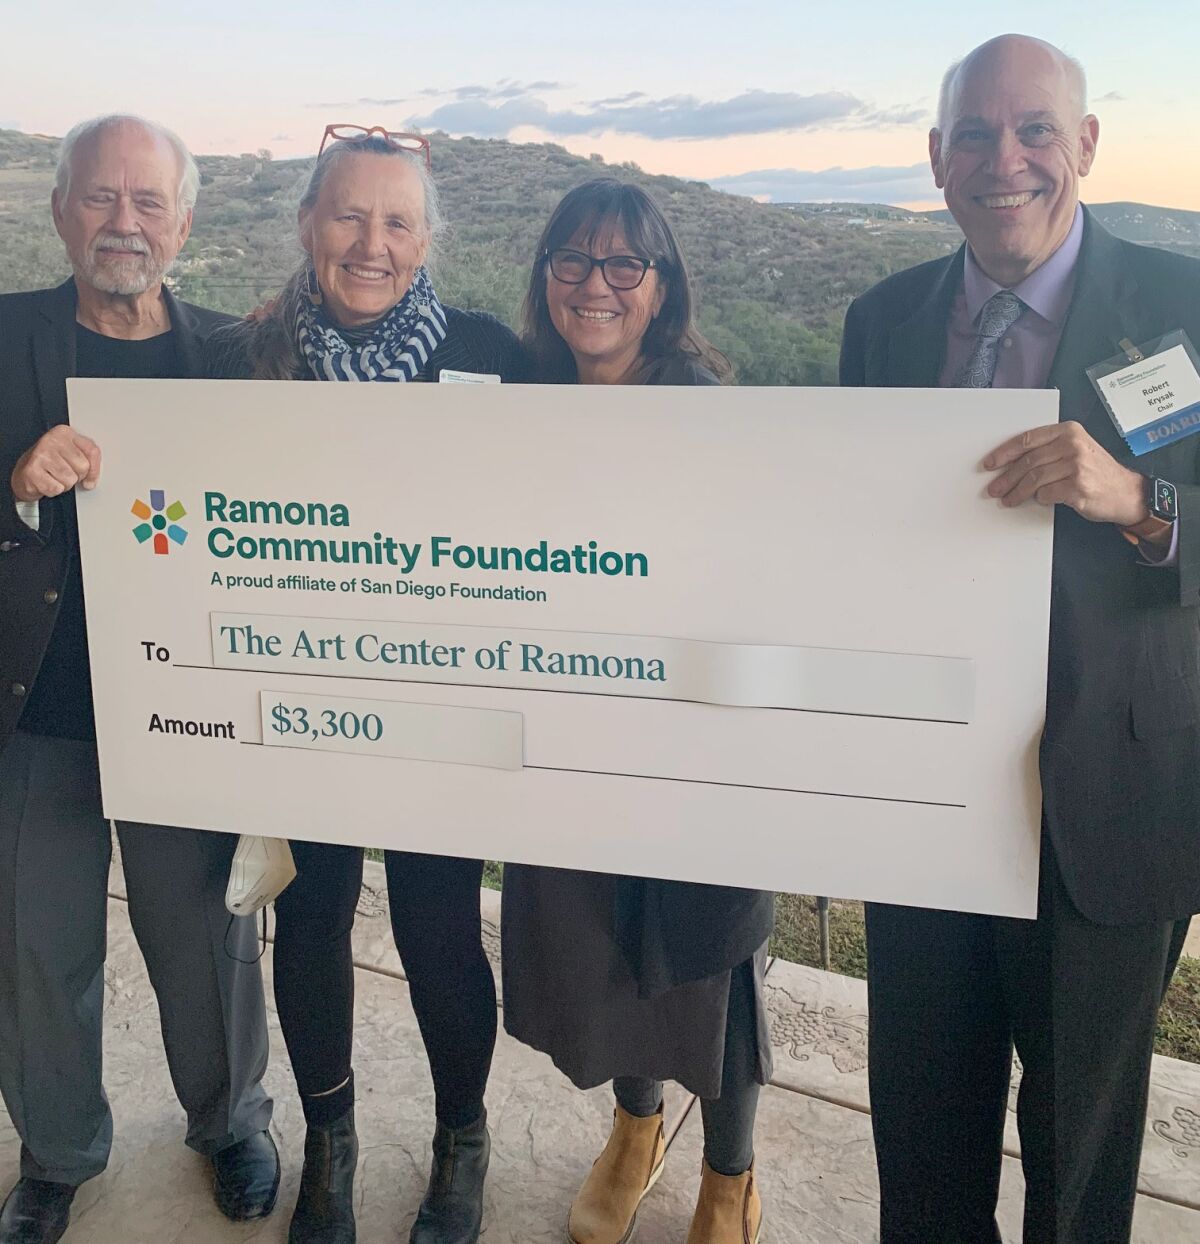 The Art Center of Ramona received a $3,300 grant from the Ramona Community Foundation.